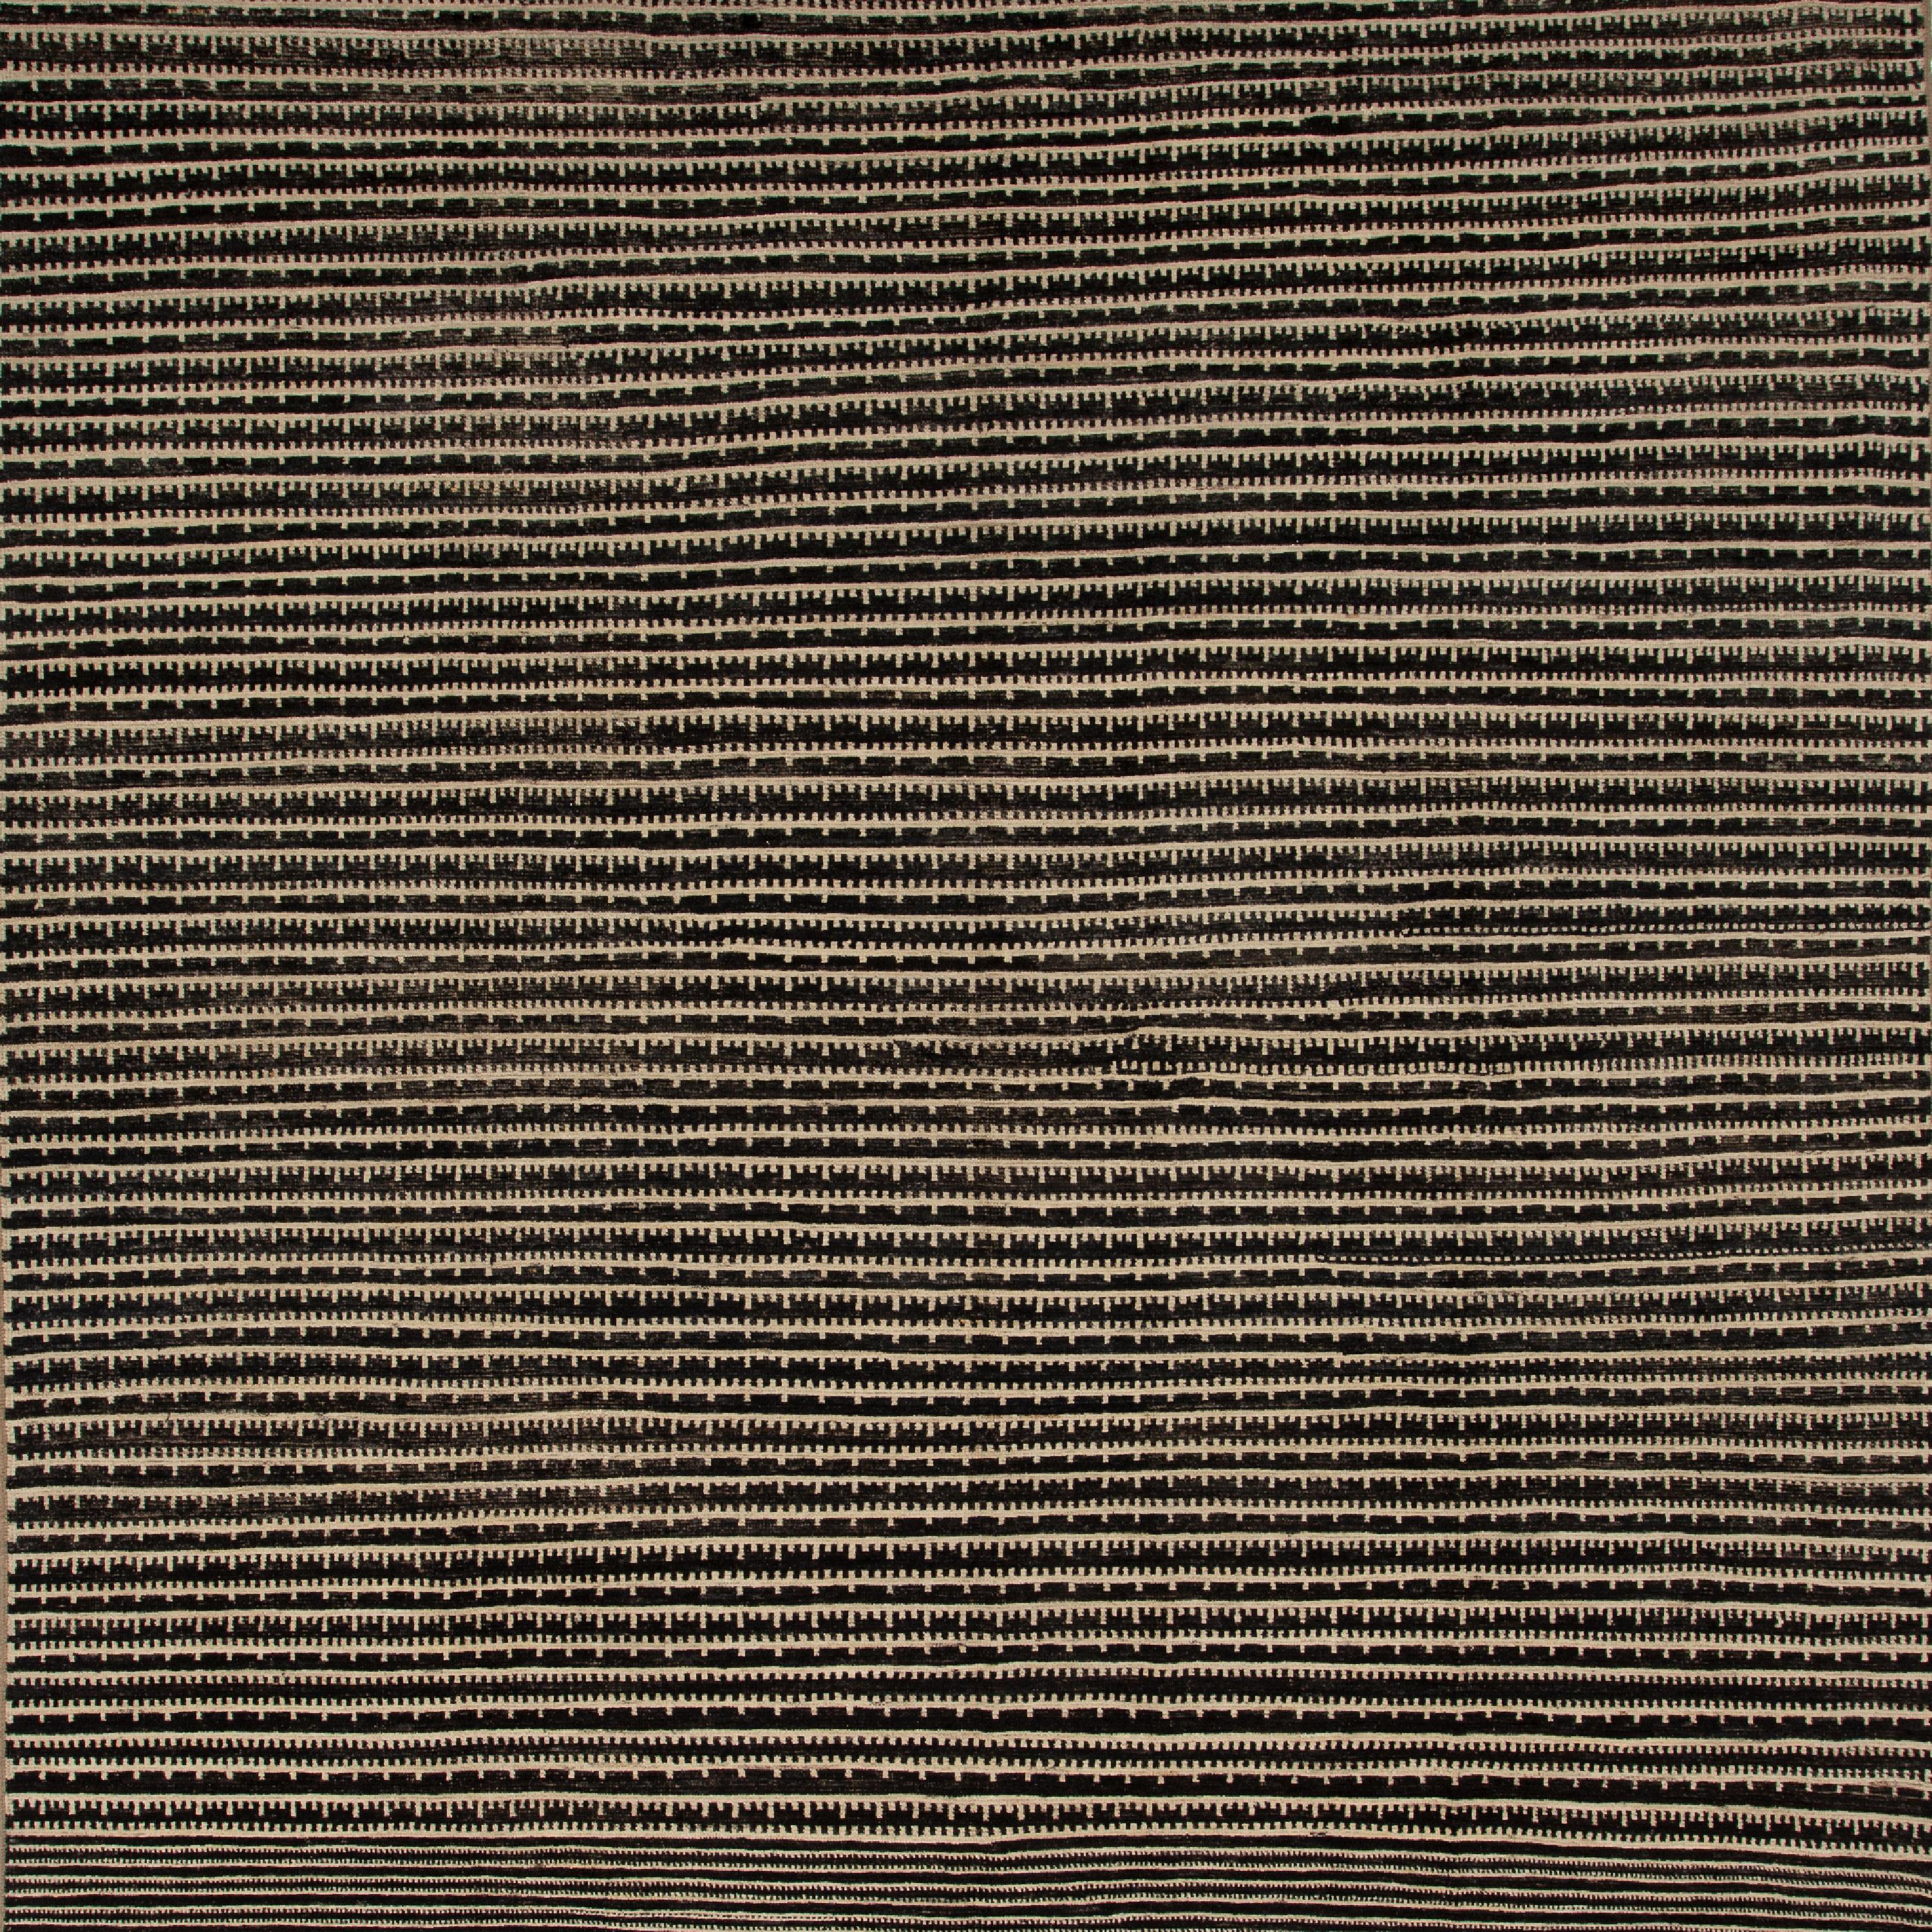 Inspired by the grounding foundations of Earth's natural colors and pure materials, this Zameen Black and Beige Geometric Wool Rug - 11'8